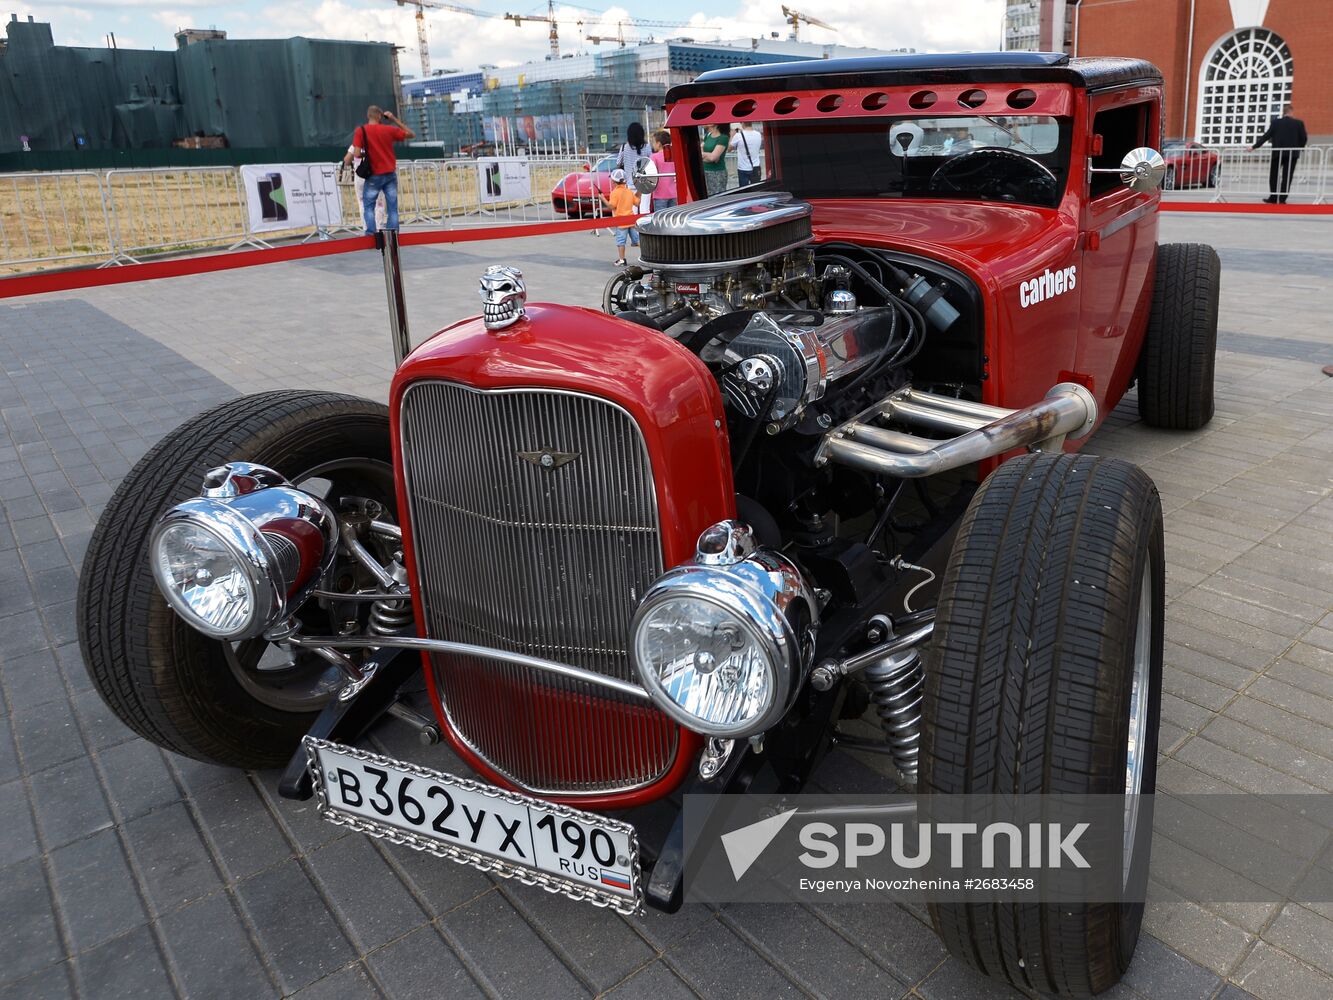 Moscow's Legends Park hosts Supercarshow 2015